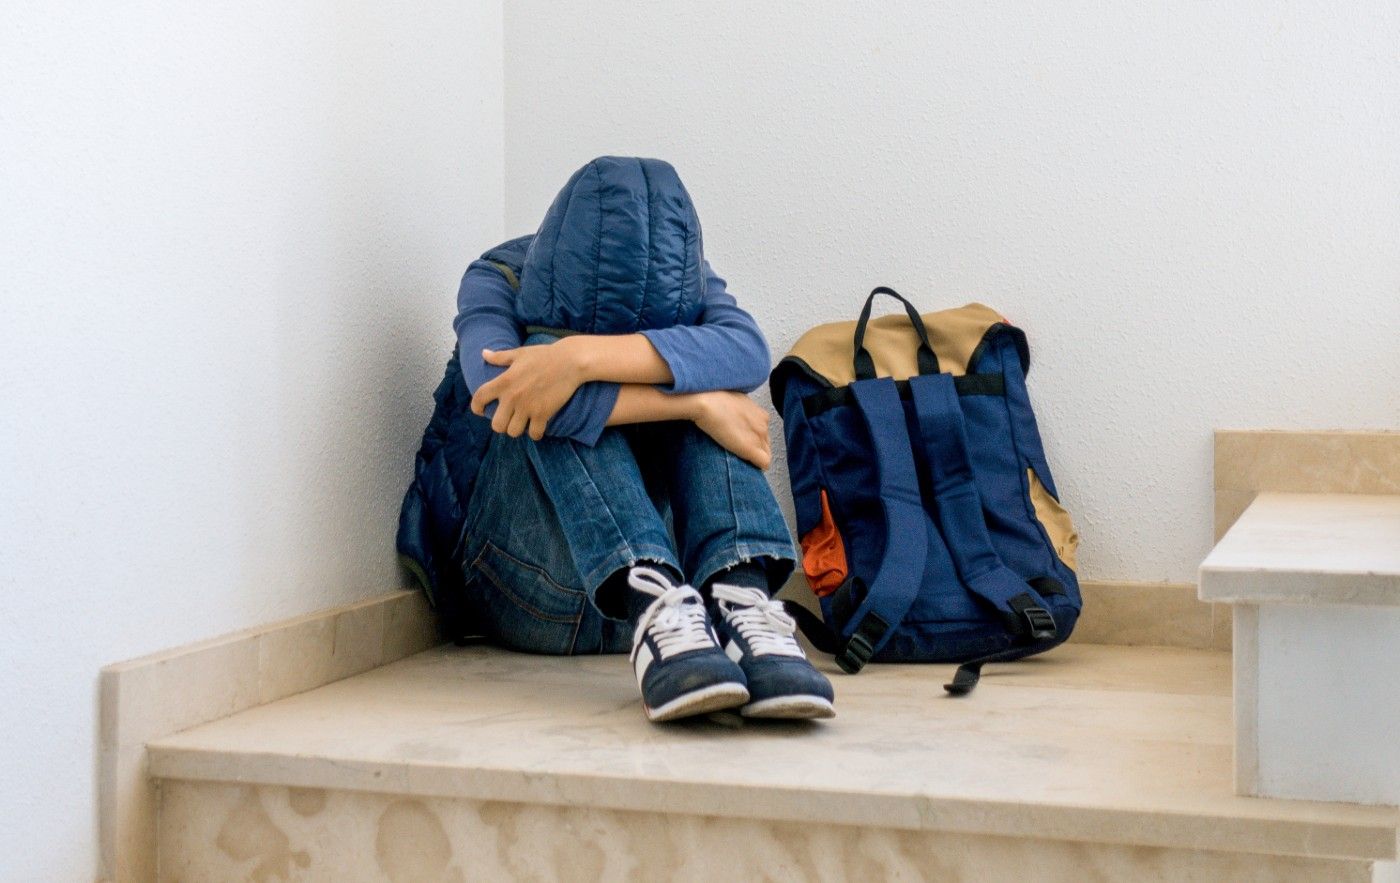 Scared boy in hooded coat sits on stair landing with backpack - sexual abuse